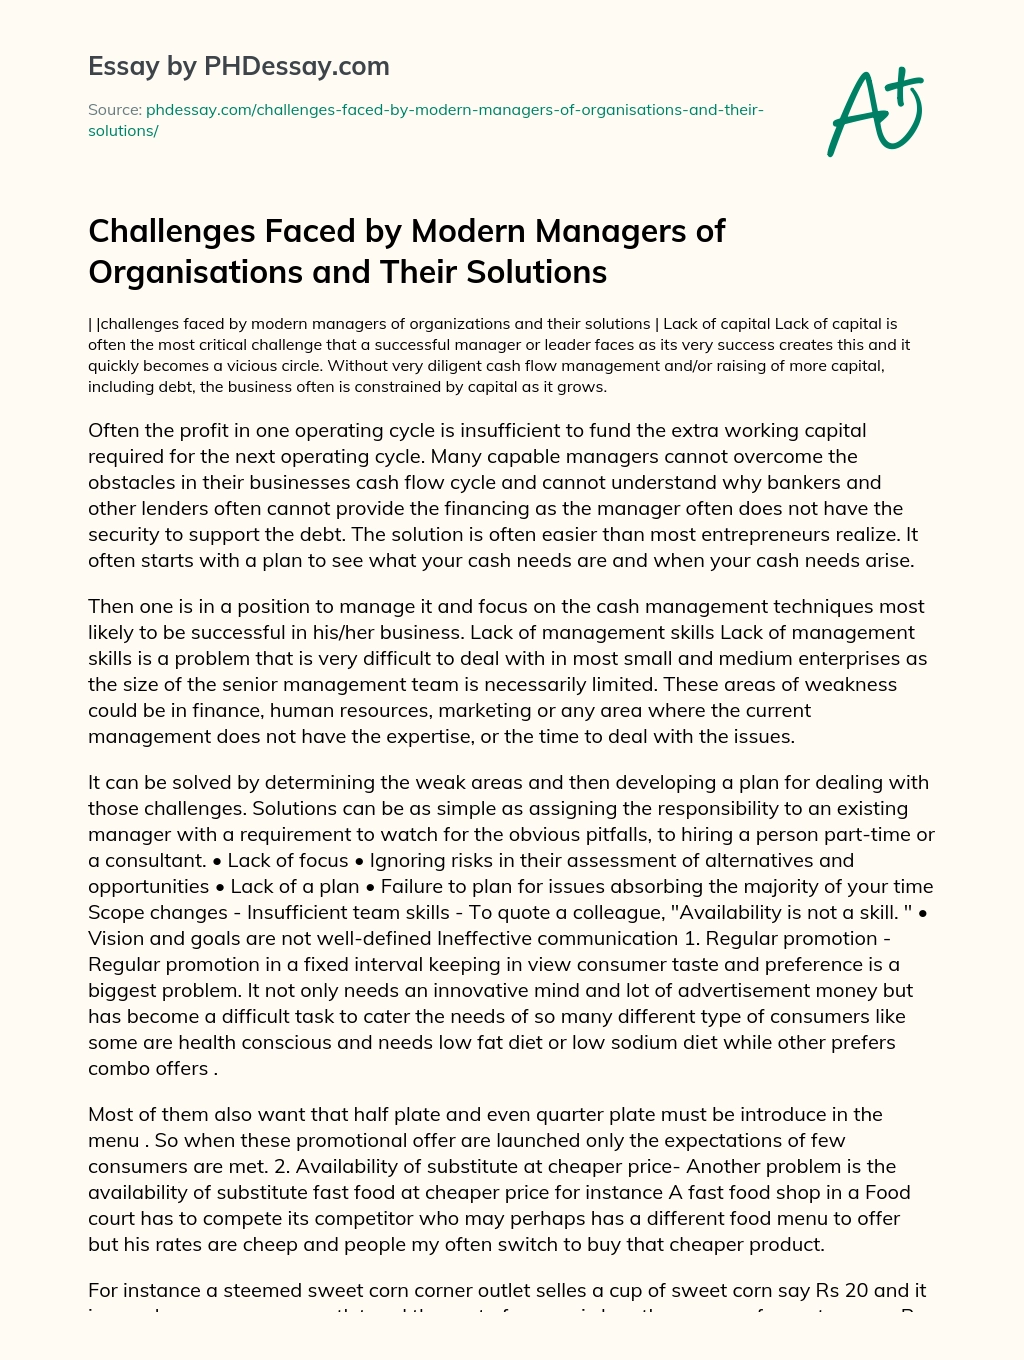 Challenges faced by modern managers of organisations and their solutions essay